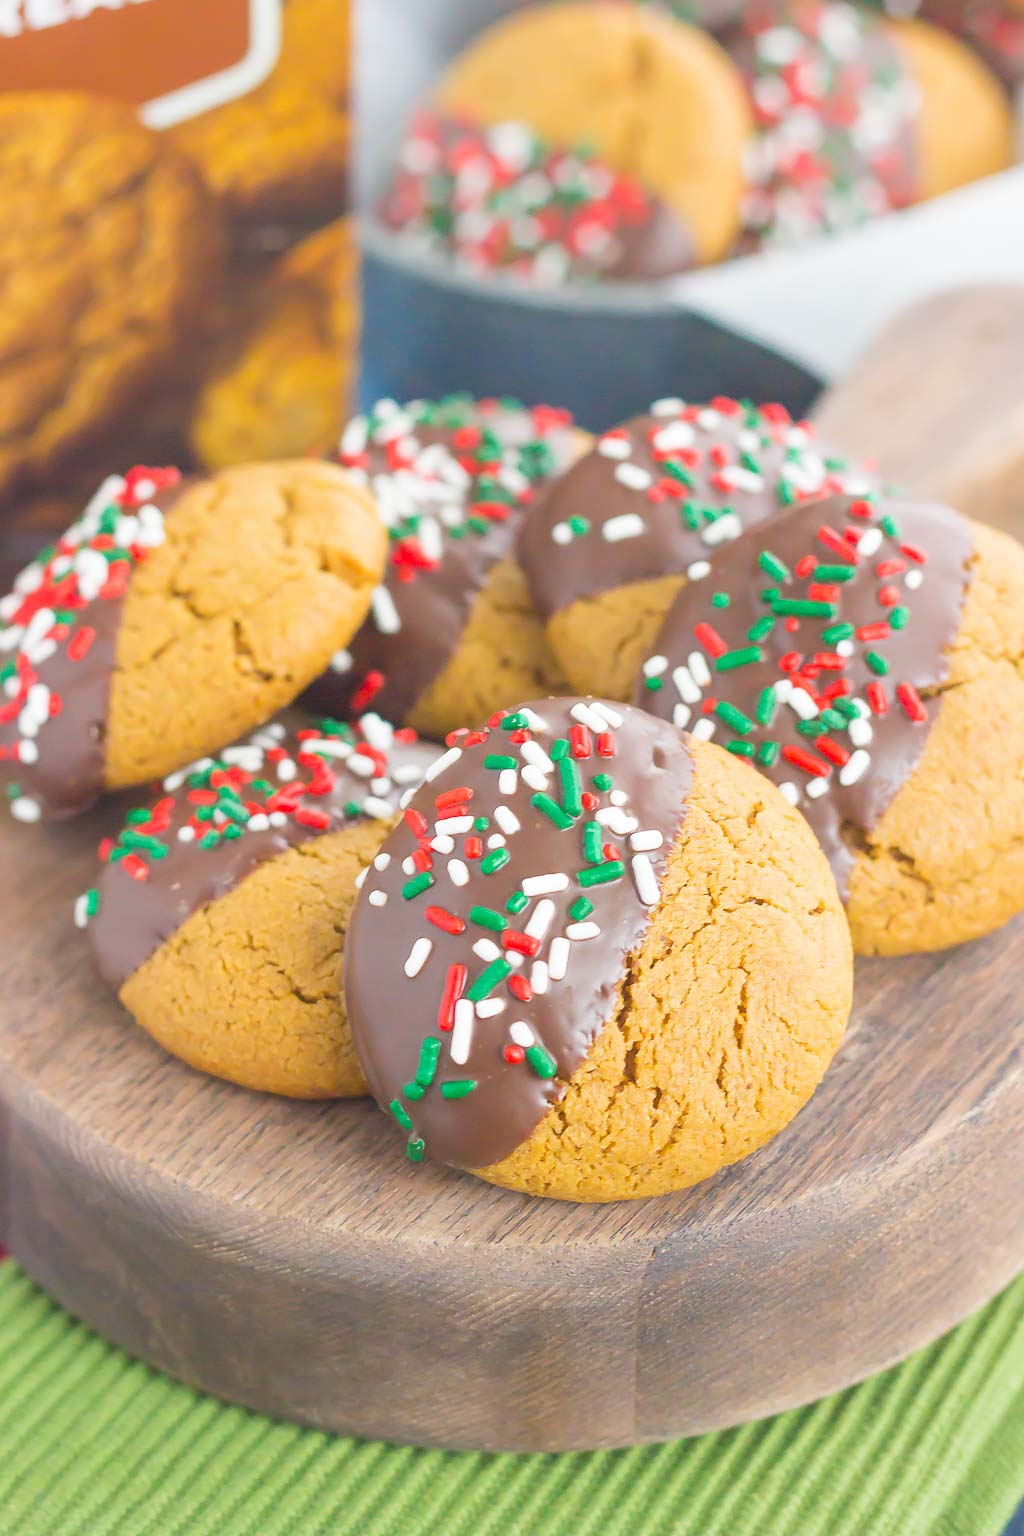 These Dark Chocolate Dipped Gingerbread Cookies are soft, sweet and perfect for the holidays. Made in one bowl and topped with decadent dark chocolate, this easy cookie will quickly become a new favorite!